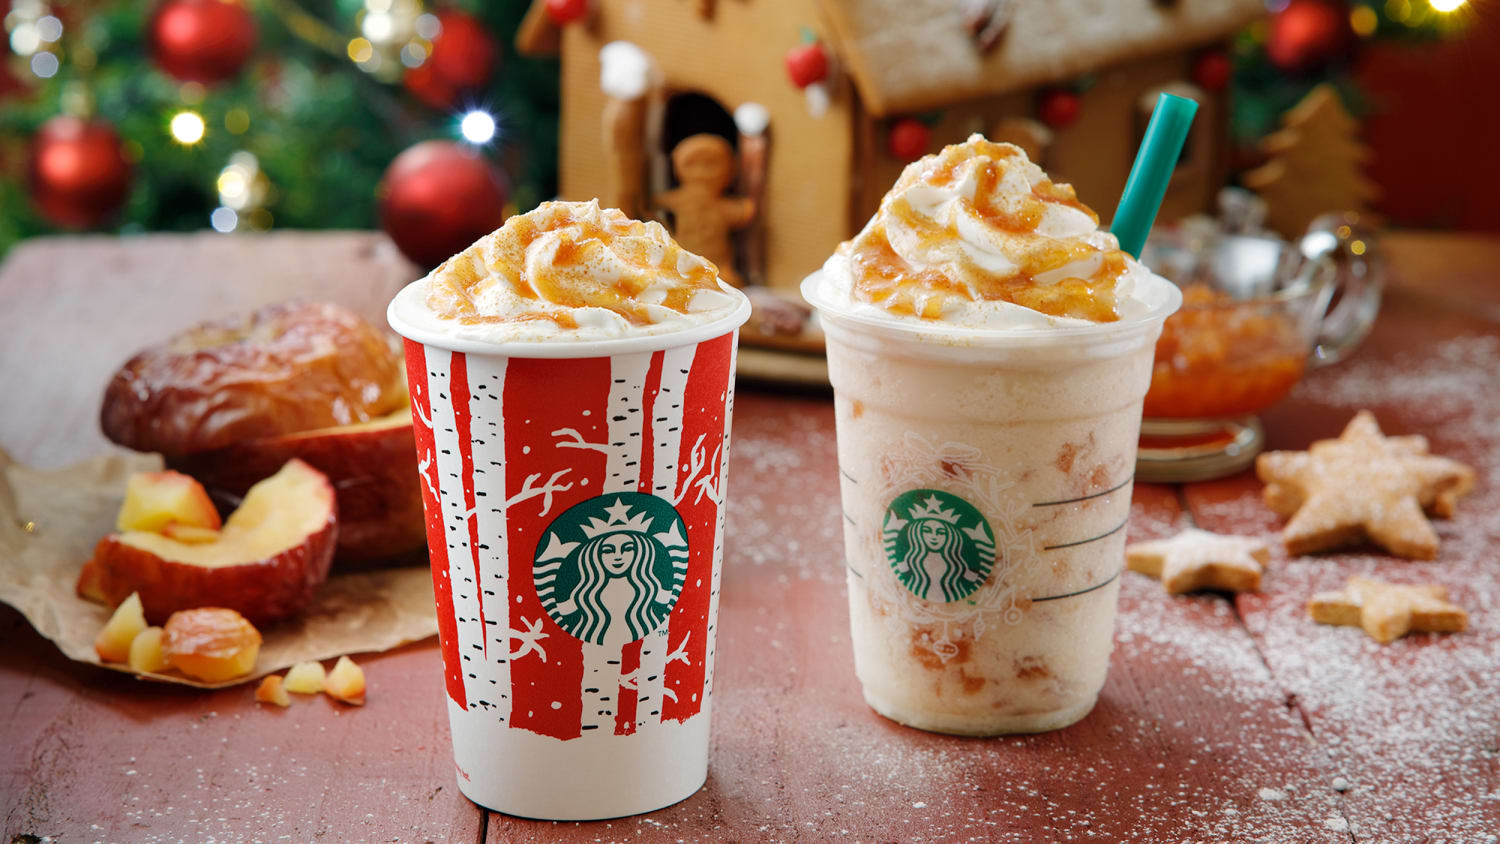 Starbucks Hot Baked Apple Latte And Frappuccino In Japan